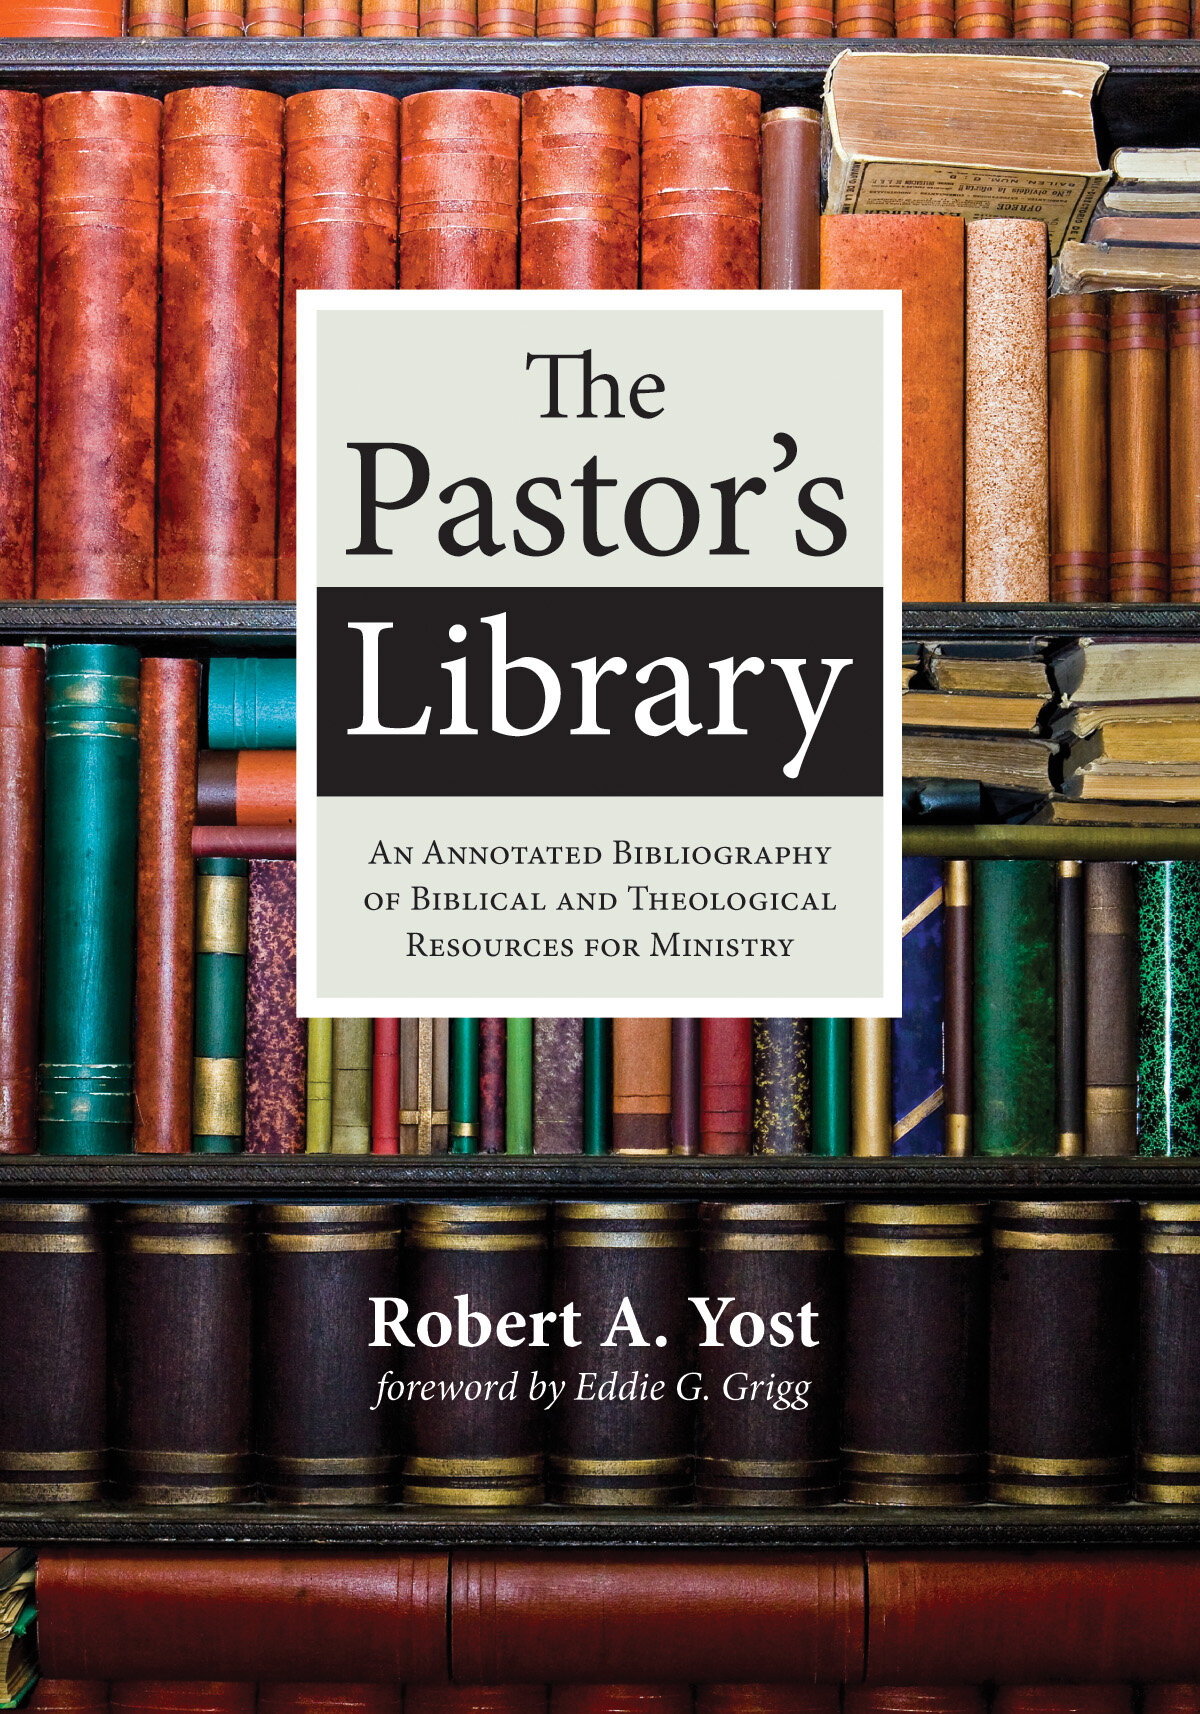 The Pastor's Library: An Annotated Bibliography of Biblical and Theological  Resources for Ministry | Logos Bible Software